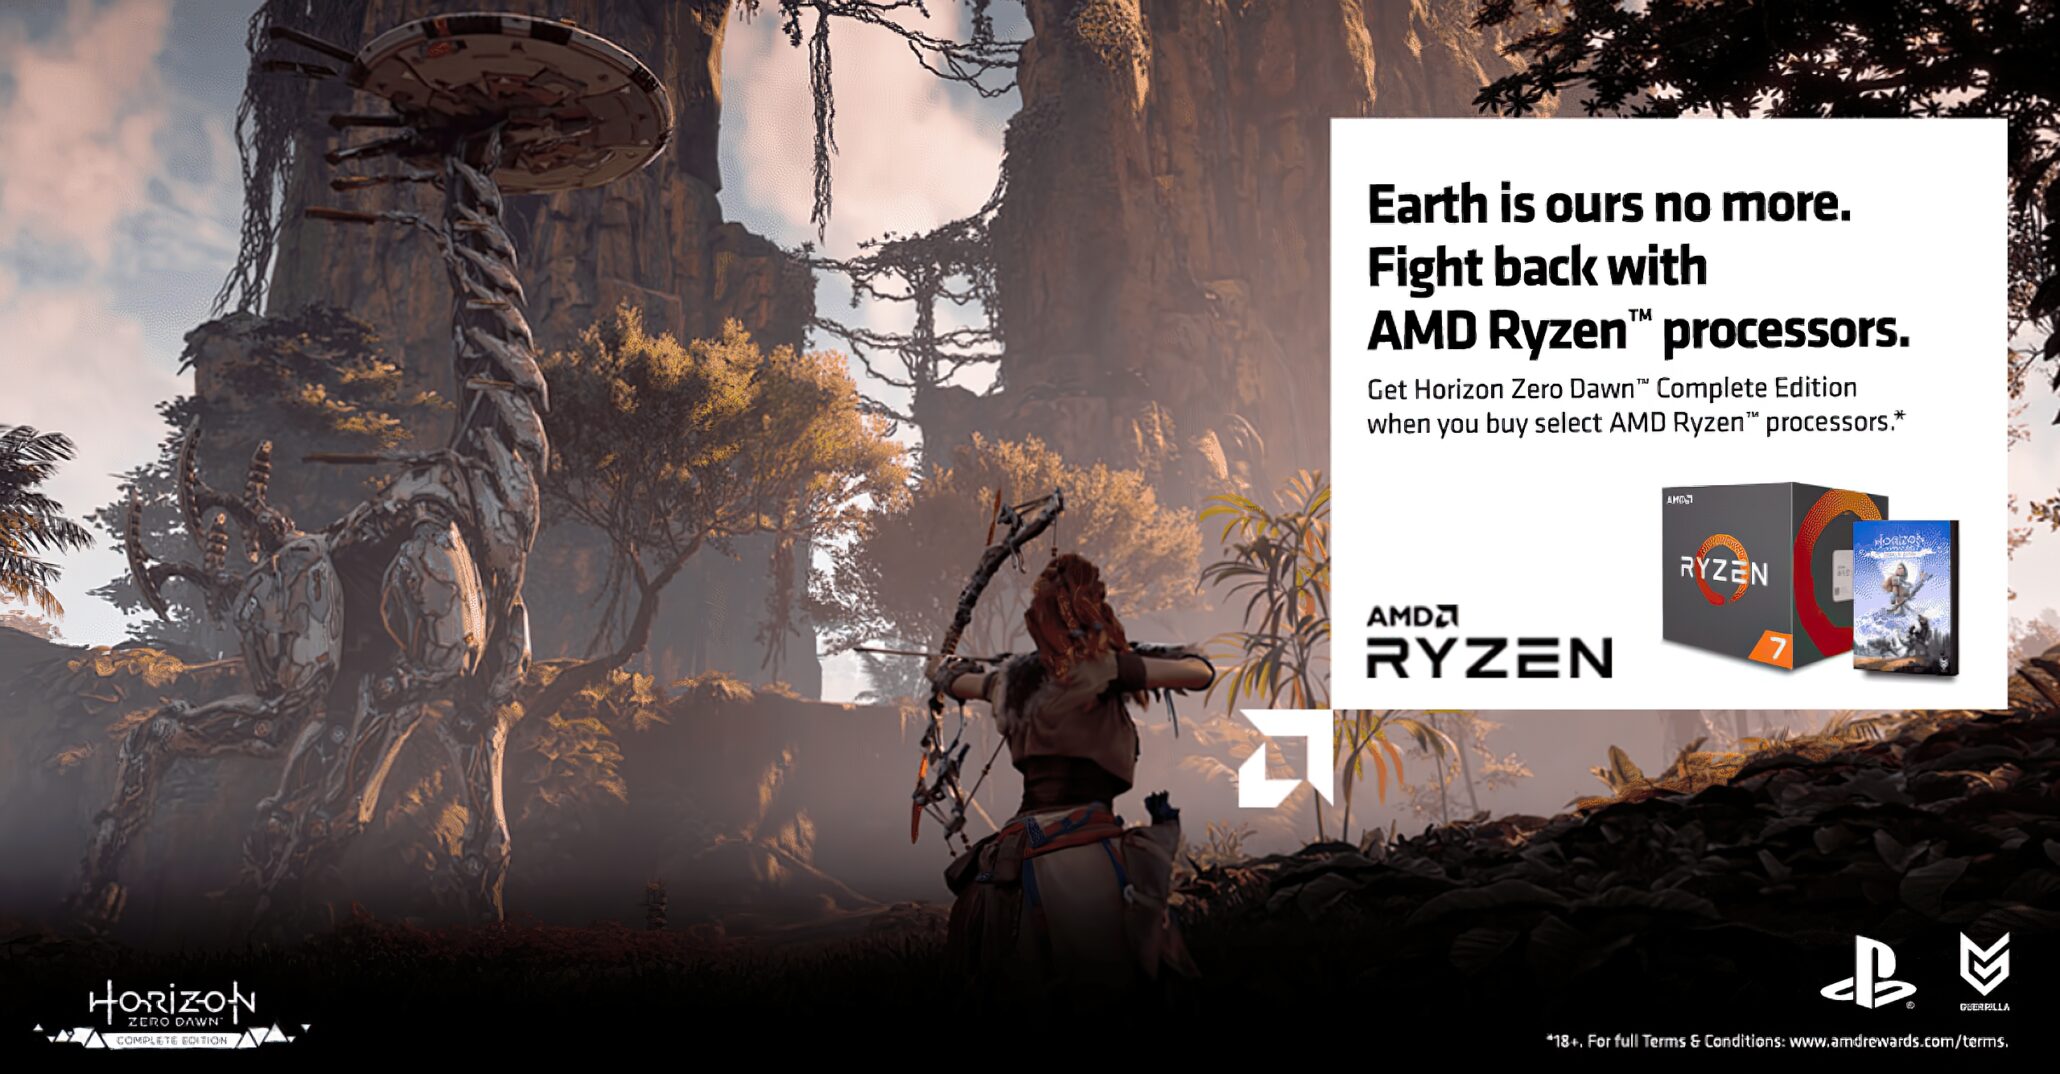 Horizon Zero Dawn PC Launched As The First Game To Be Optimized For The FidelityFX Single Pass Downsampler And Other Features